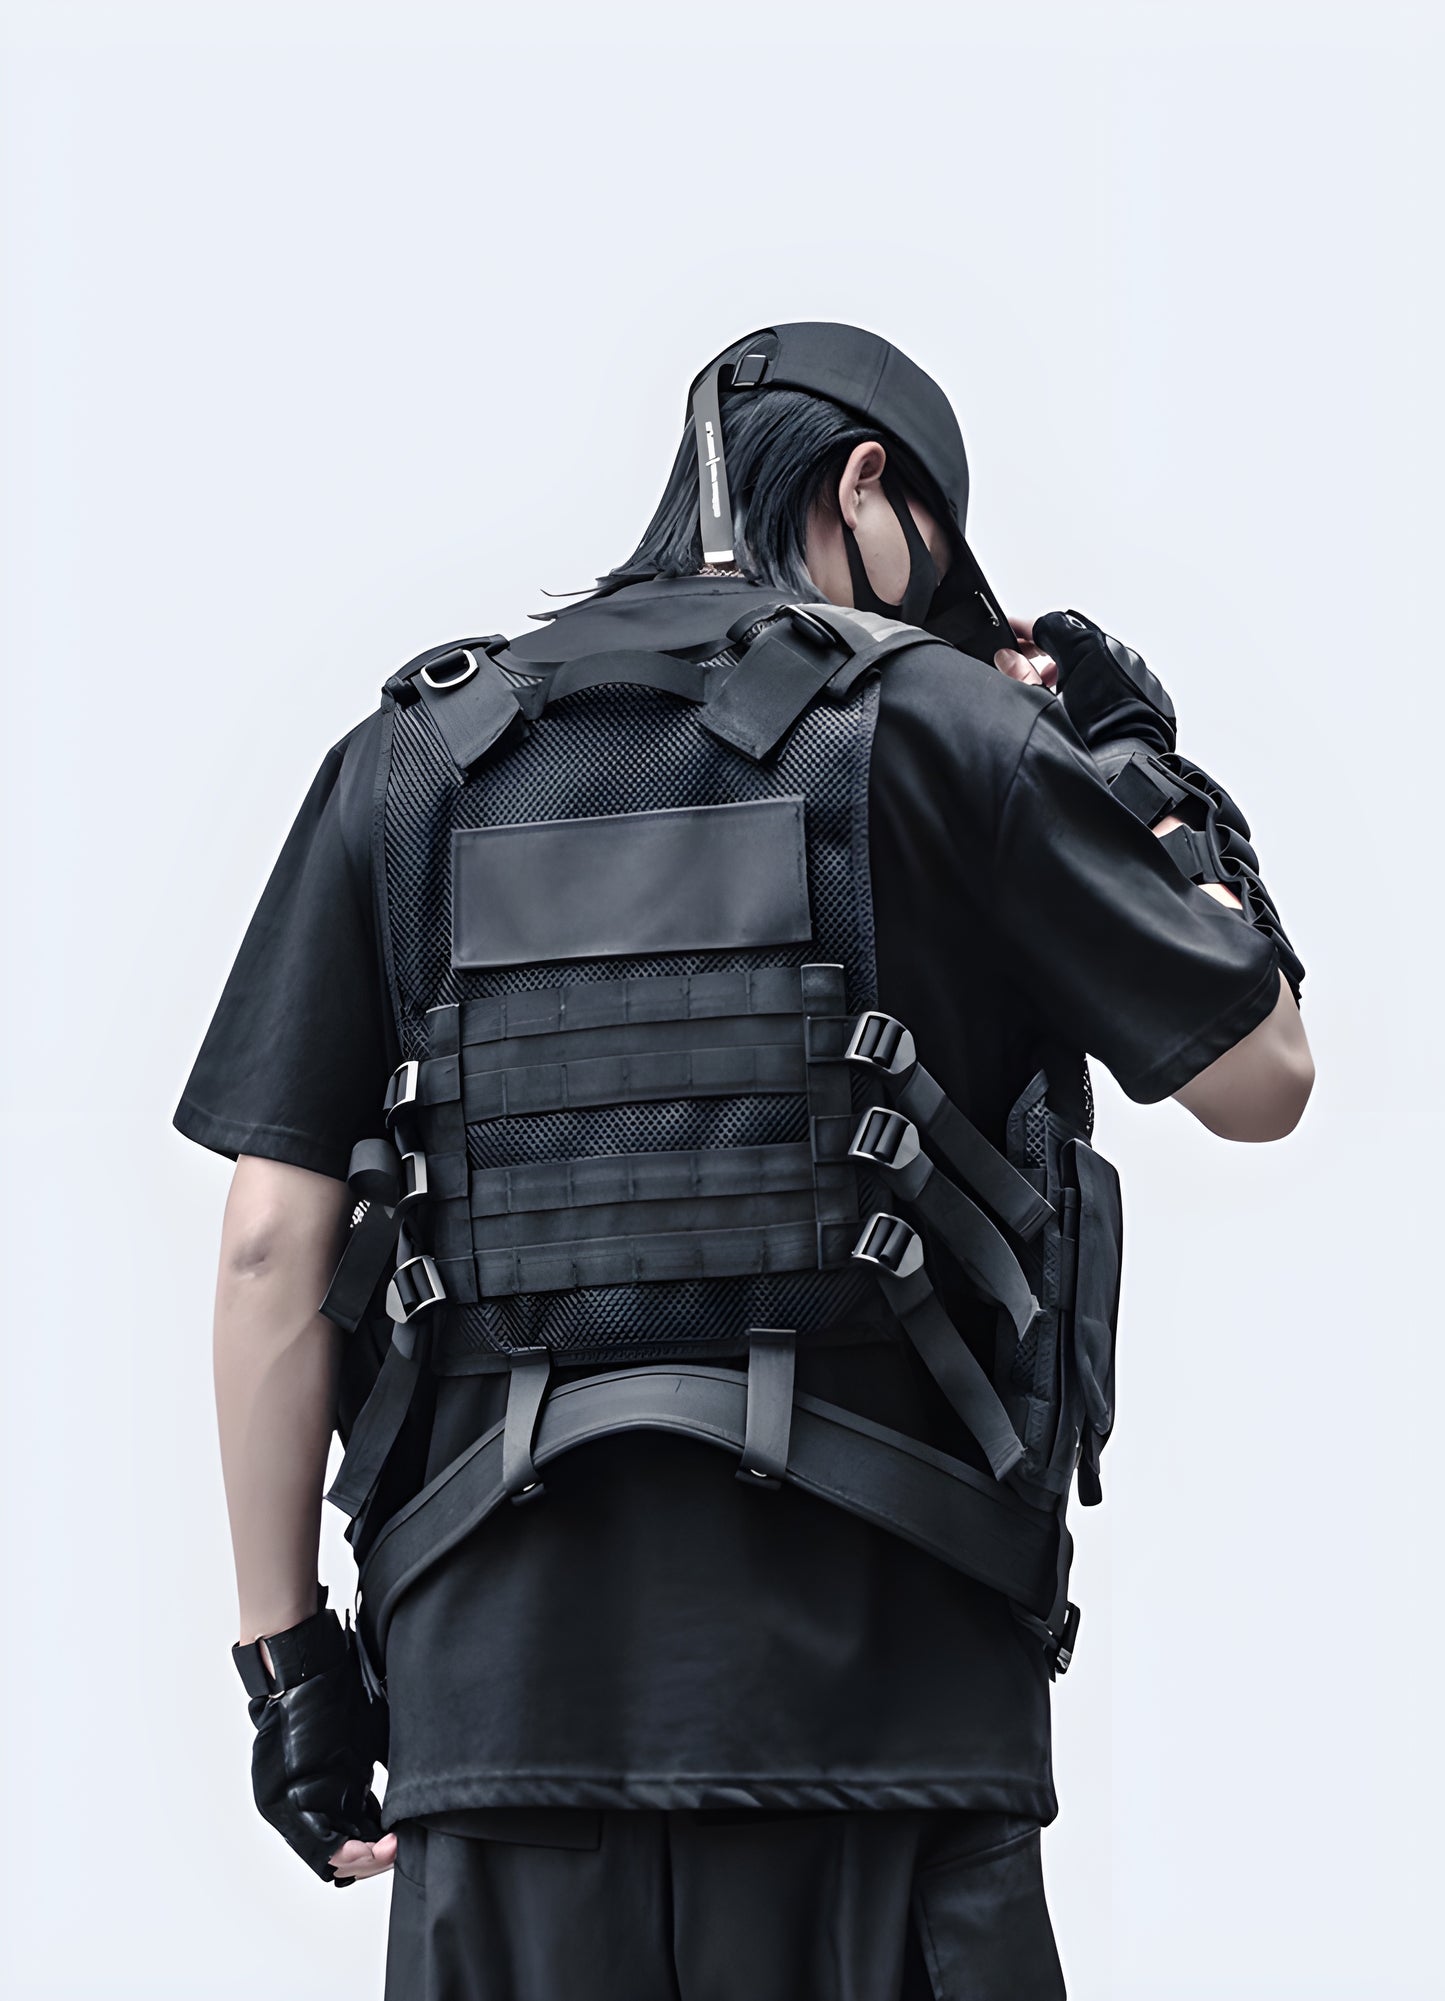 Ventilated mesh back keeps you comfortable in this protective bulletproof vest.